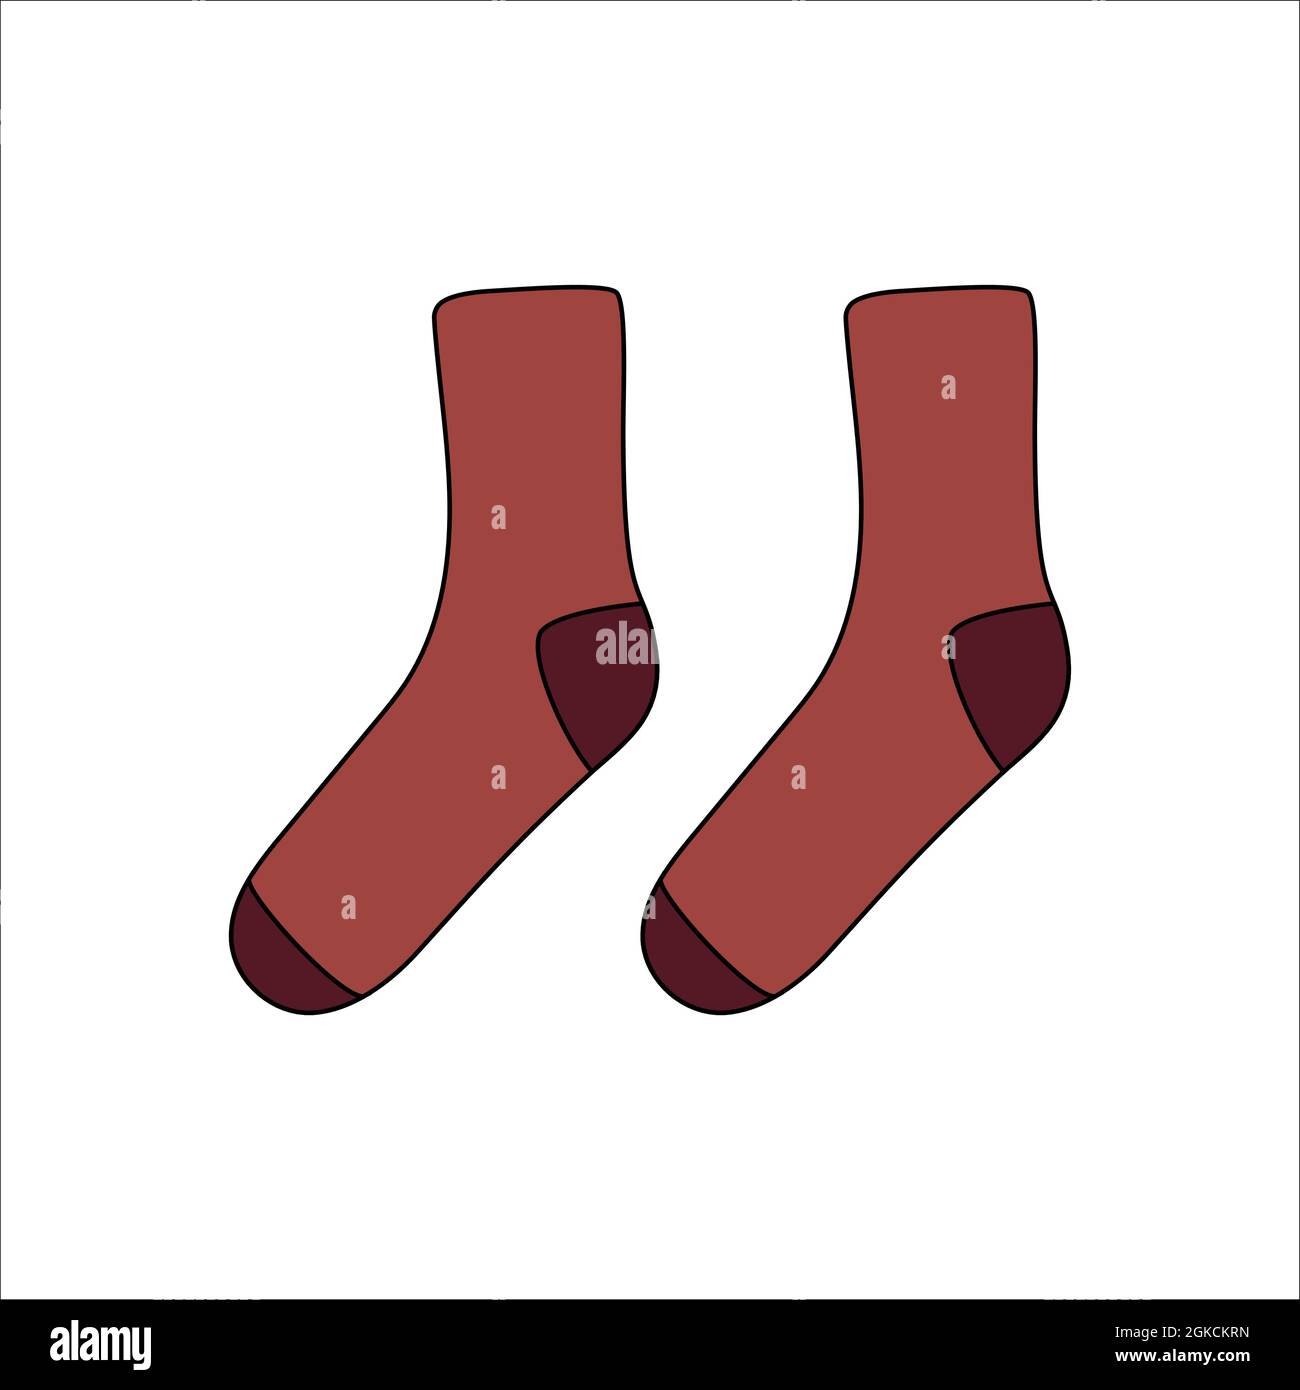 Doodle socks set design. Winter vector colorful illustration isolated on white background. Stock Vector